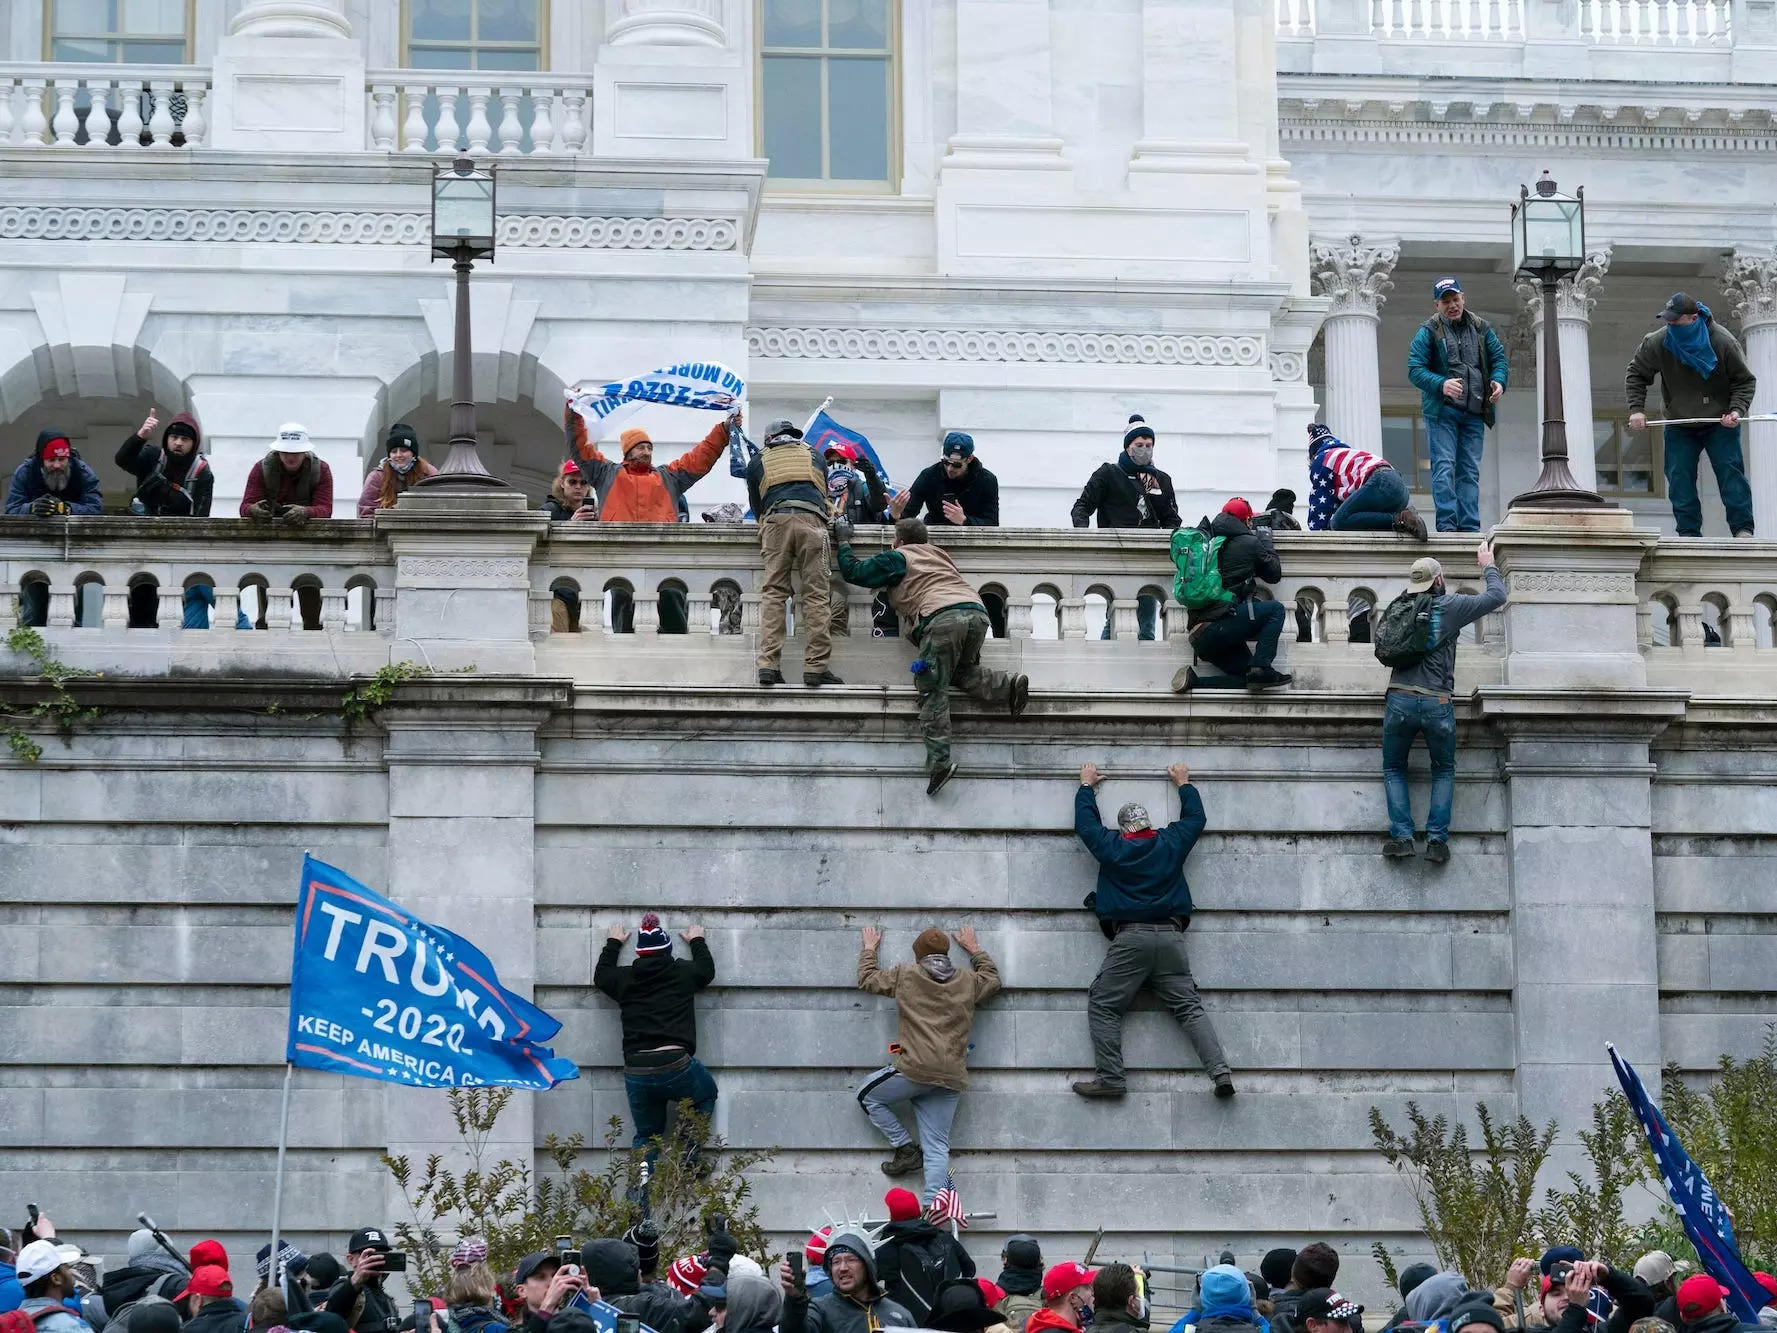 Violent insurrectionists loyal to President Donald Trump scale the west wall of the the US Capitol in Washington on January 6, 2021.